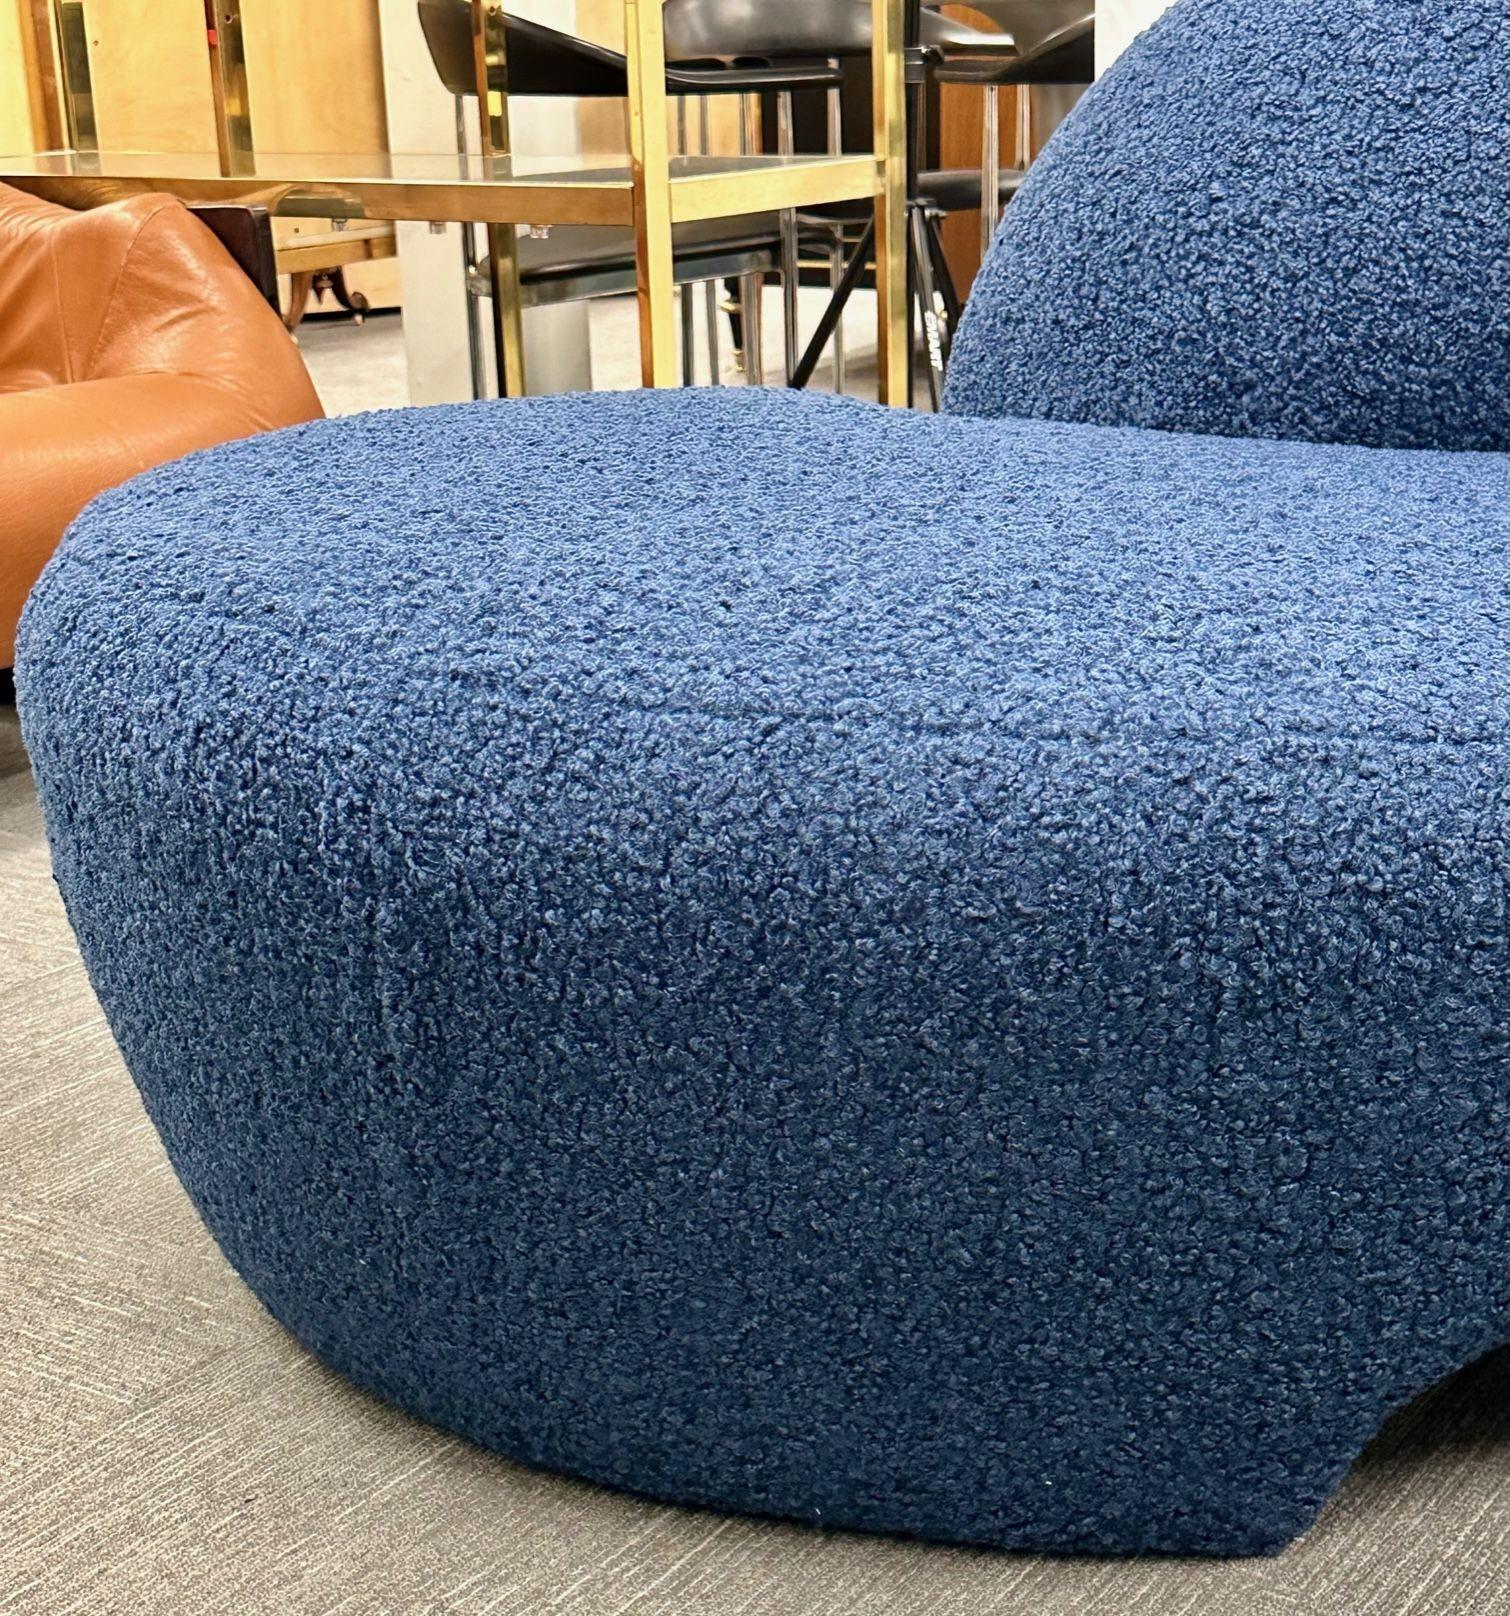 Mid-Century Modern Style Organic Form Kidney Shaped Cloud Sofa, Blue Boucle For Sale 1